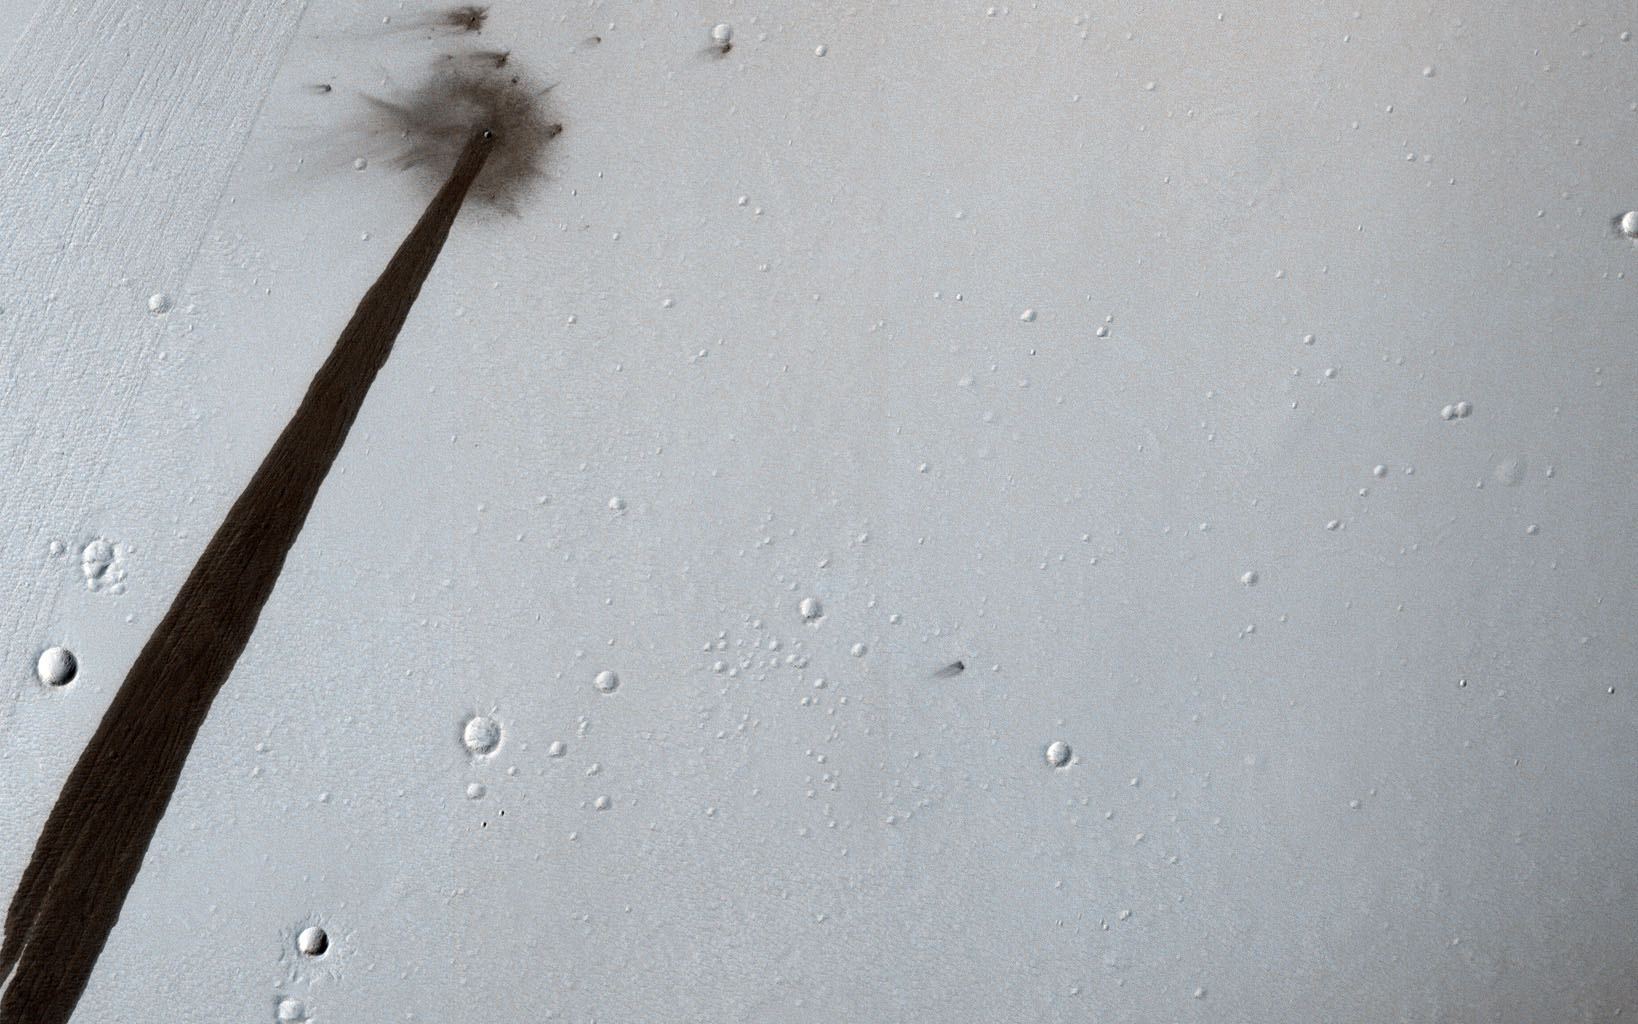 This image from NASA's Mars Reconnaissance Orbiter shows an impact crater that triggered a slope streak. When a meteoroid hit the surface and exploded to make the crater, it destabilized the slope and initiated this avalanche.